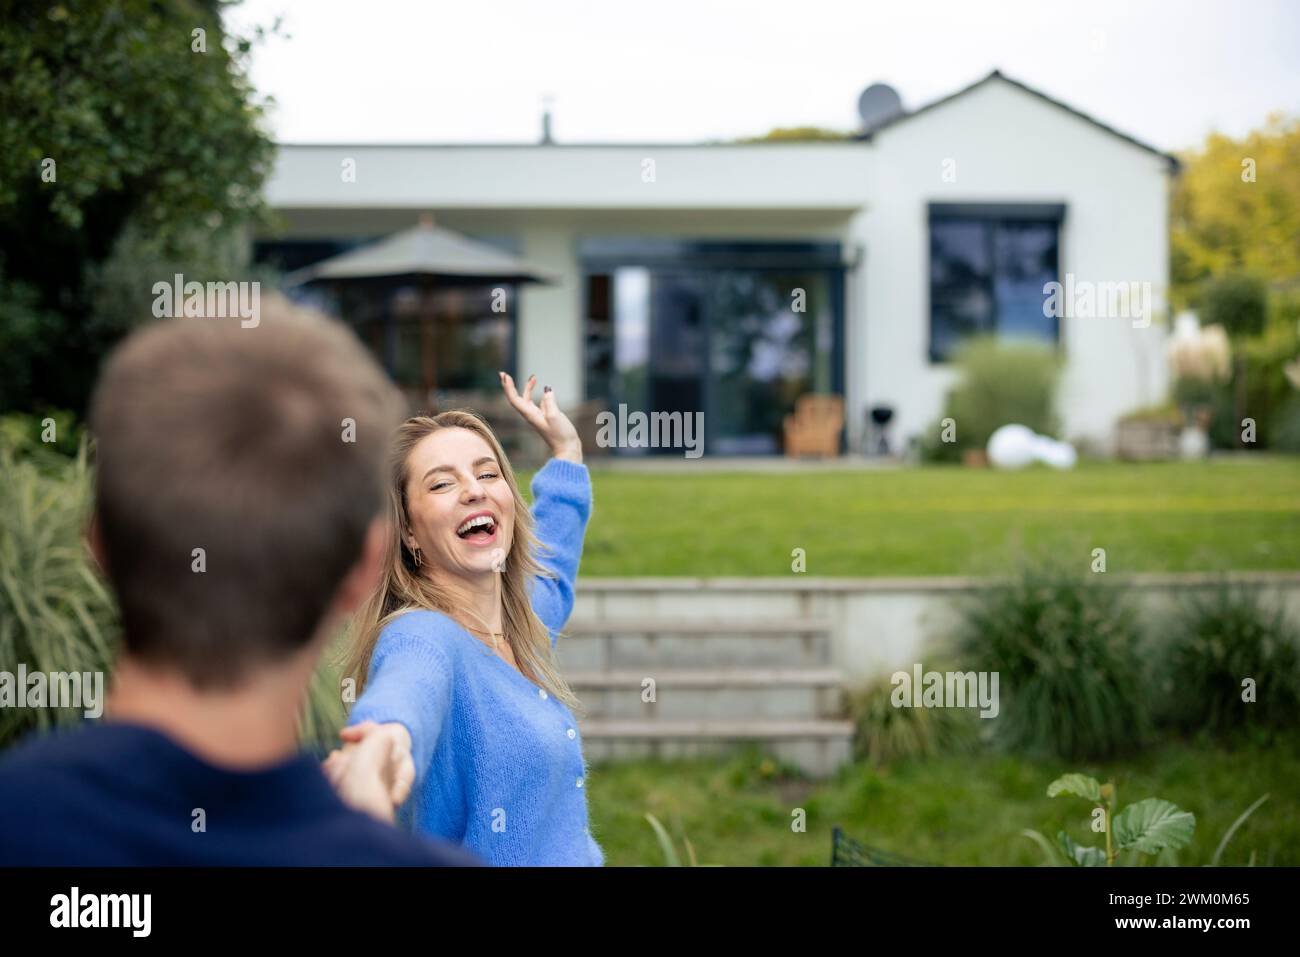 Cheerful woman holding hands with man in front of house Stock Photo